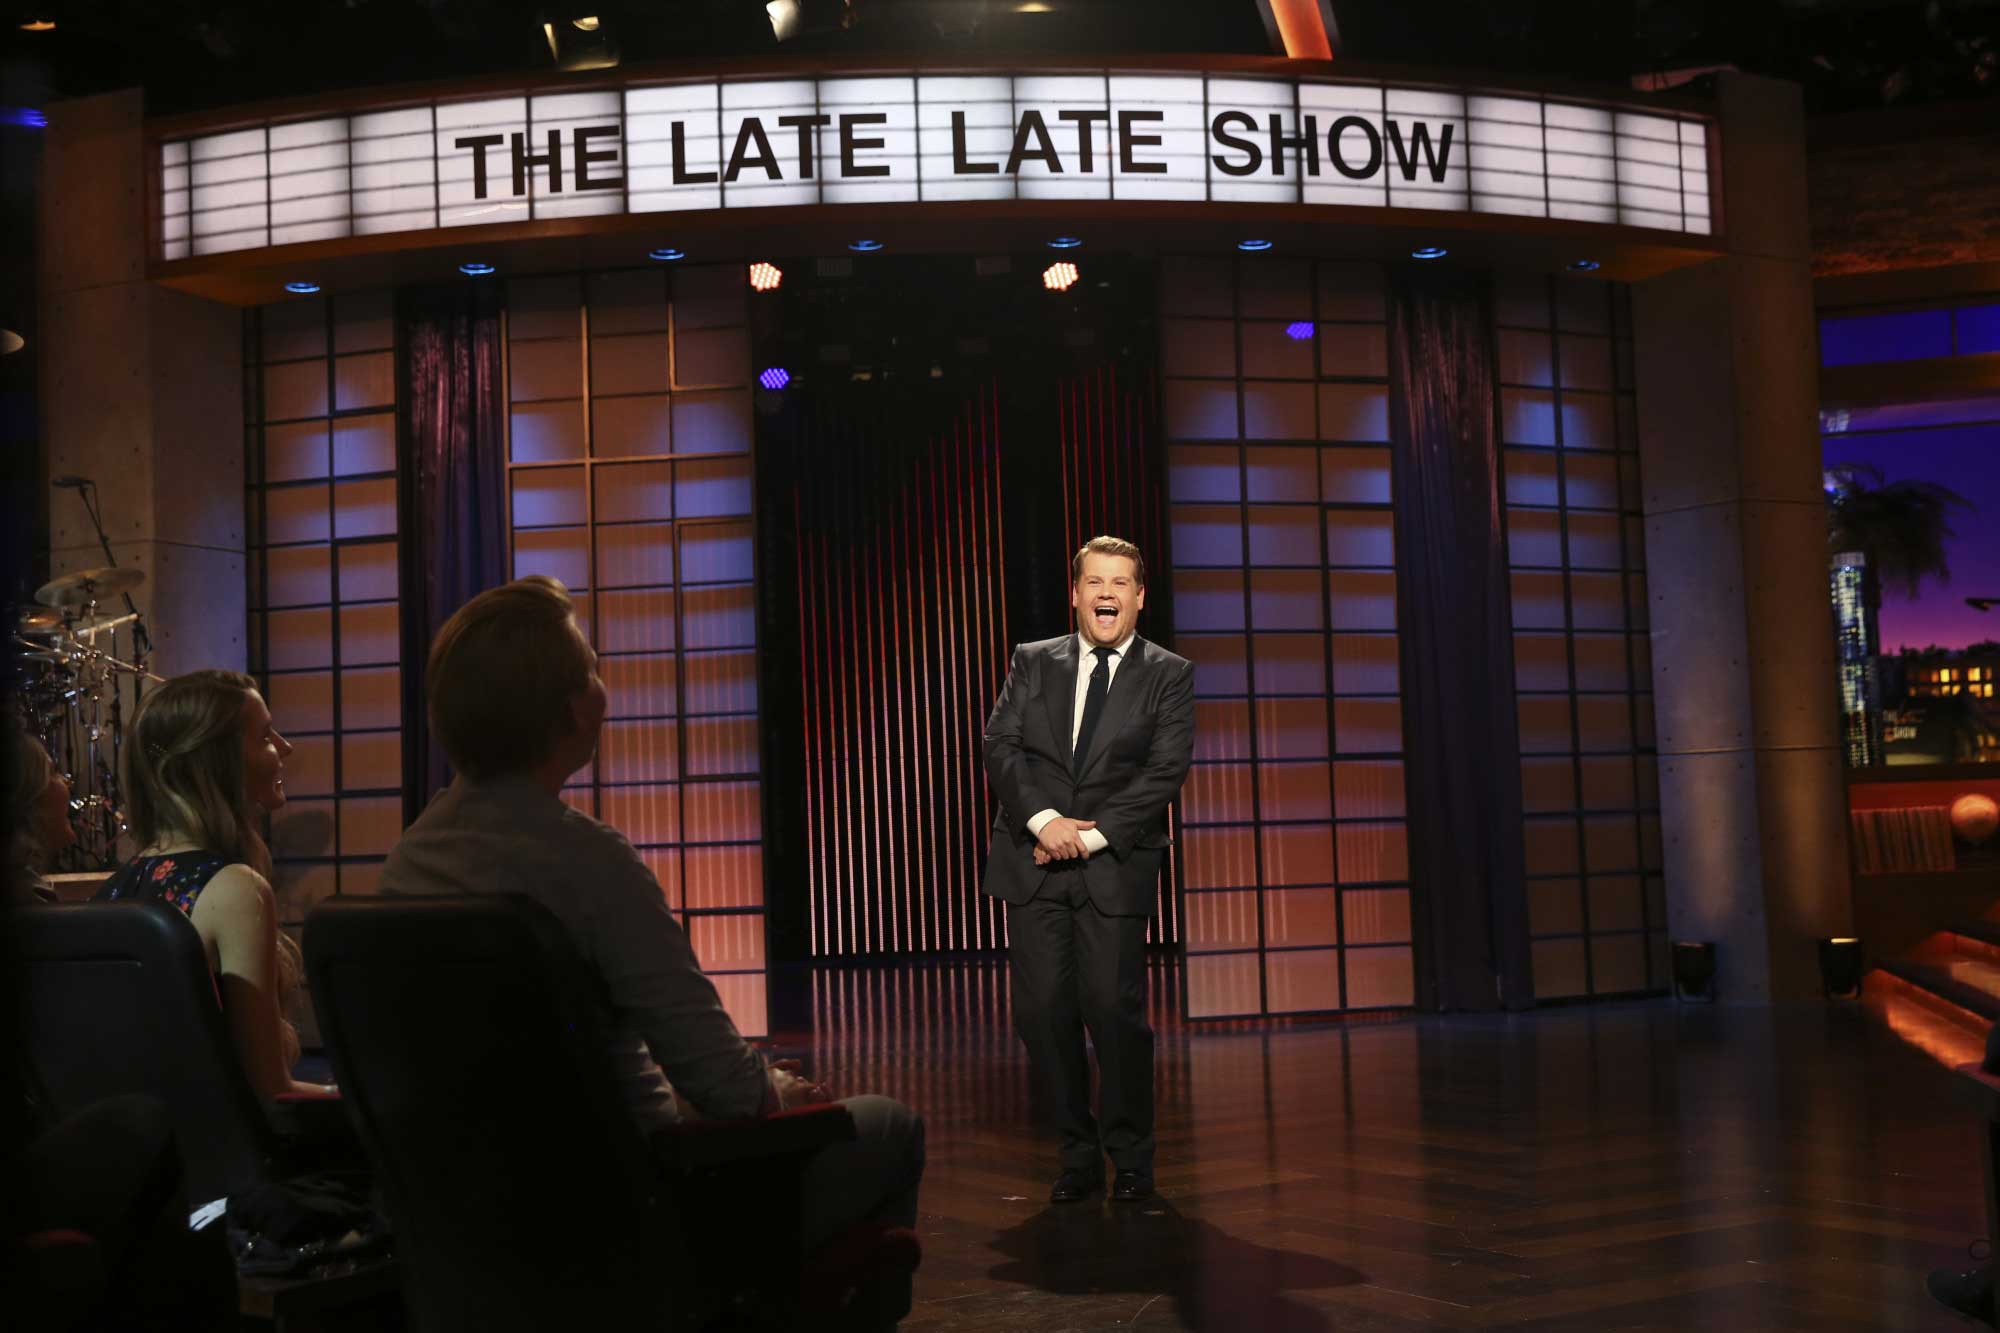 James Corden steps on stage for the first episode of "The Late Late Show with James Corden," in Los Angeles on March 23, 2015.